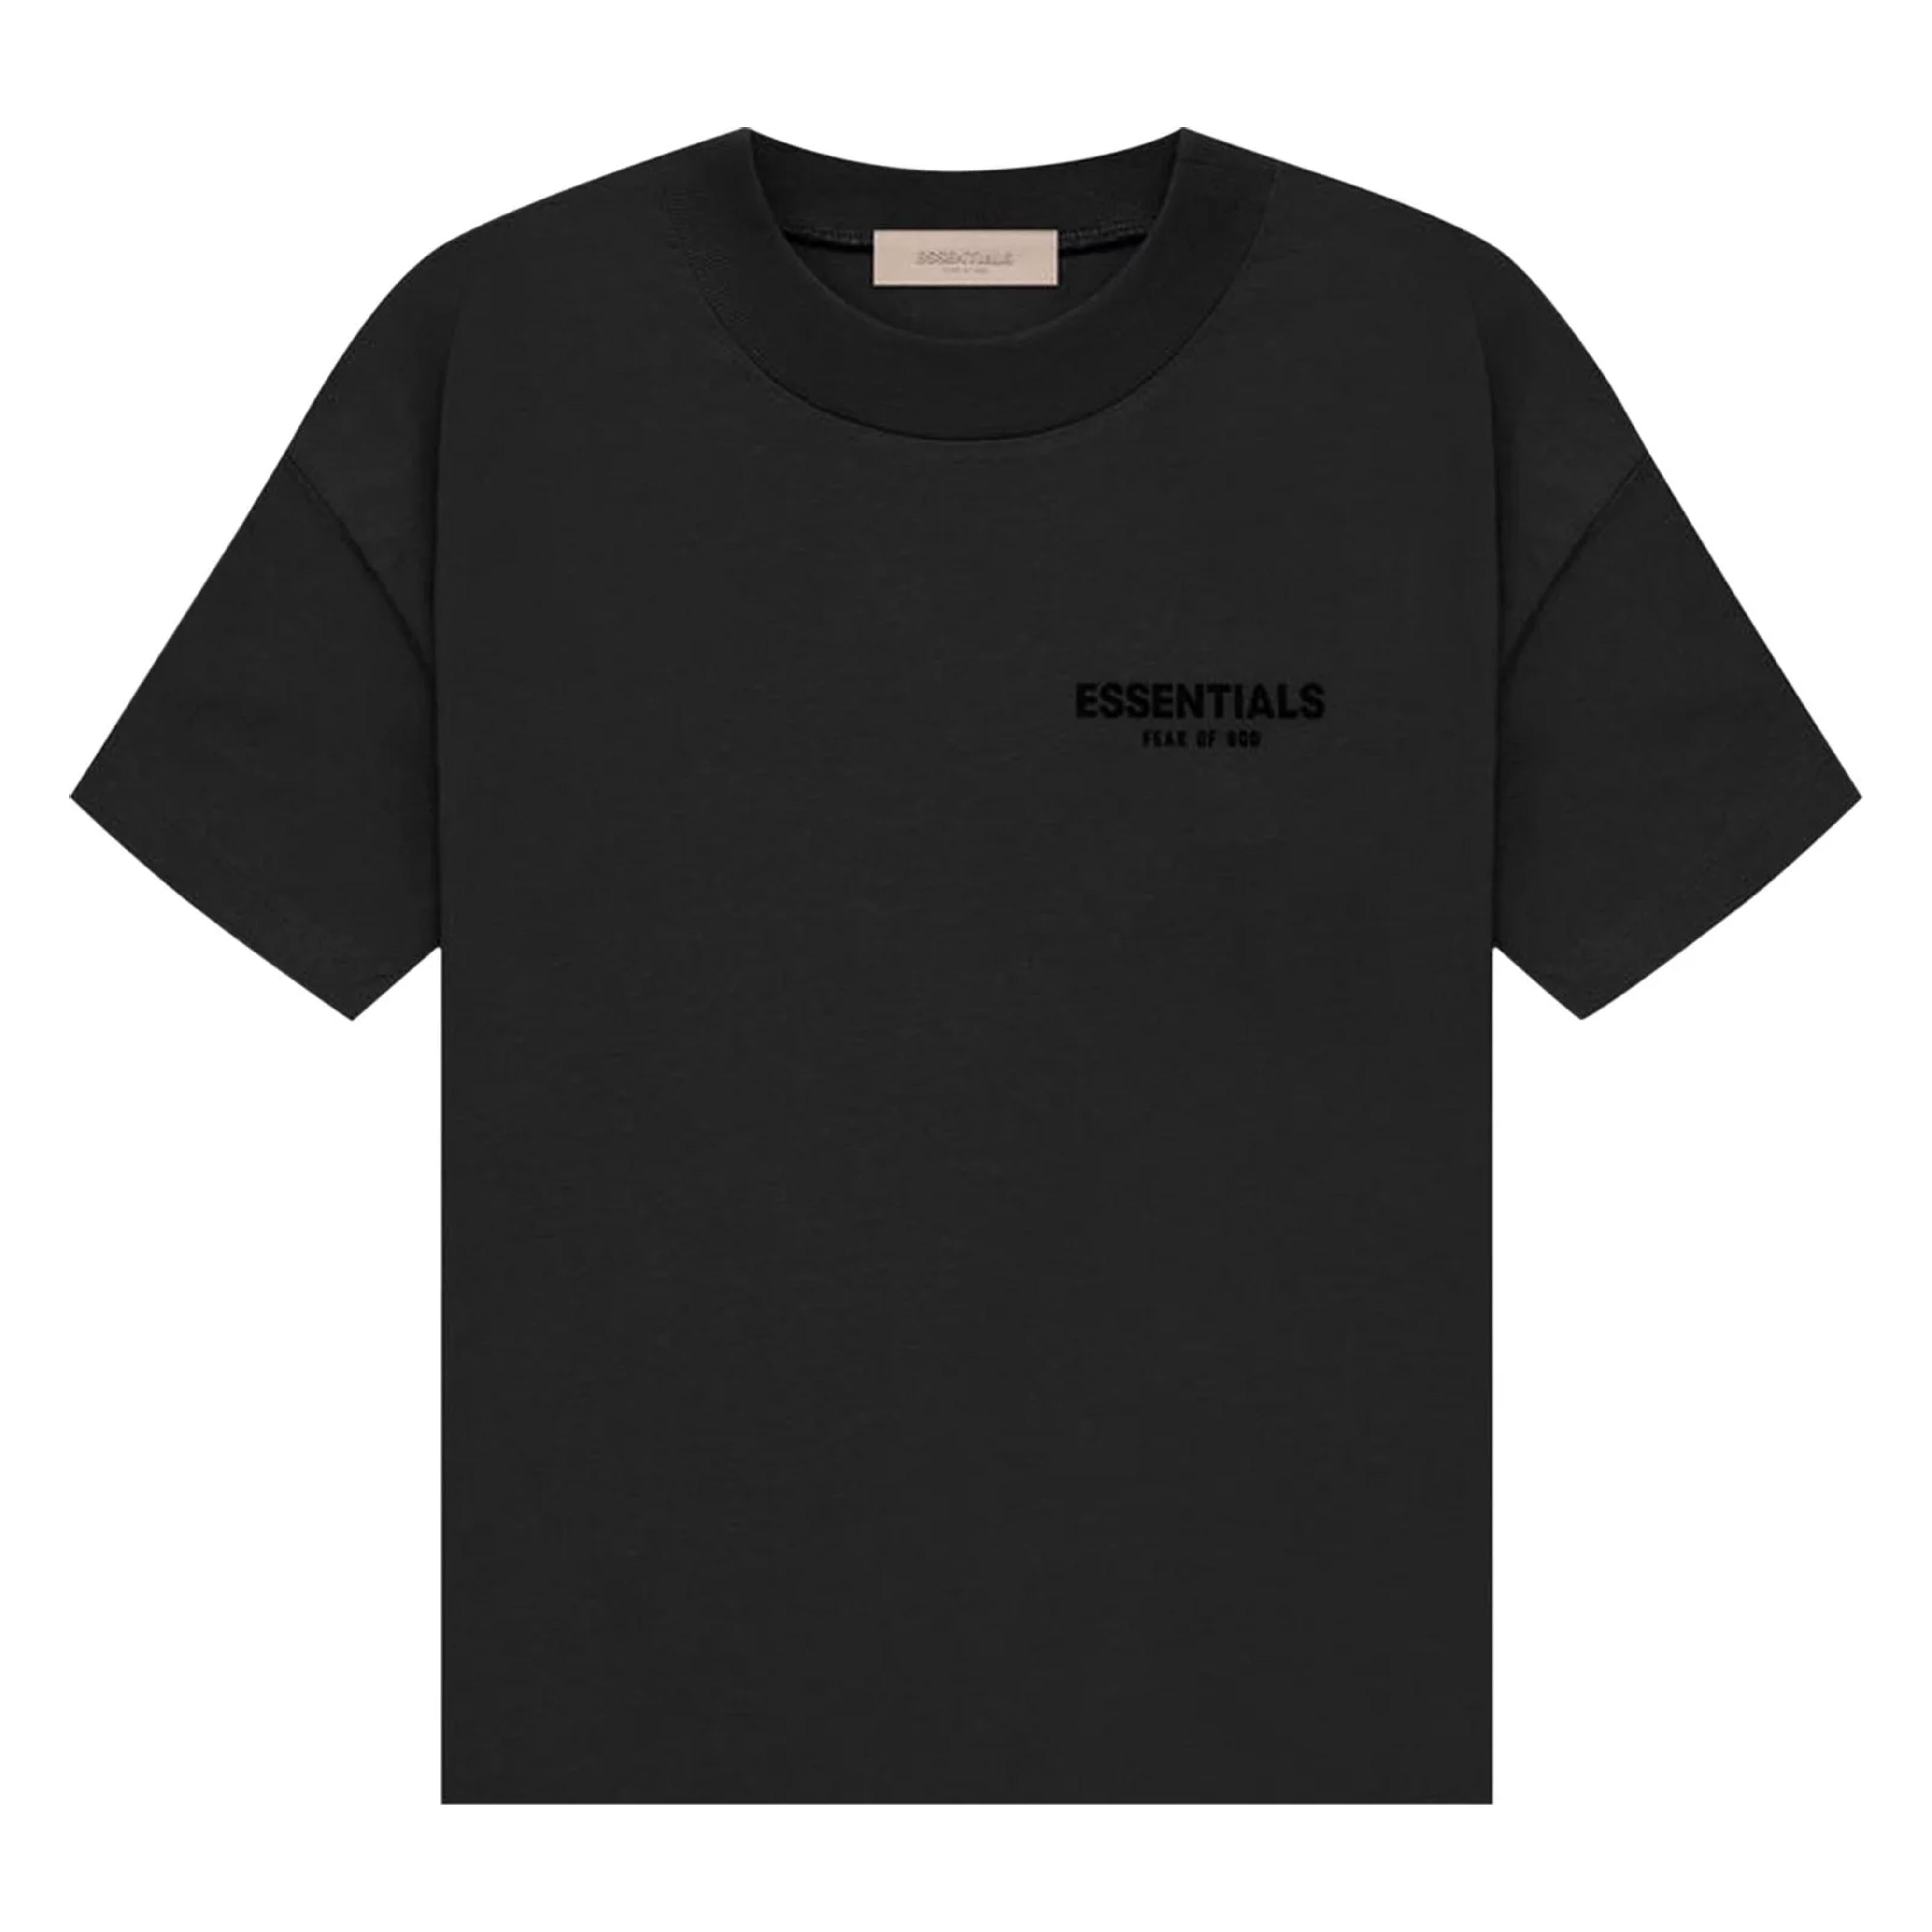 Fear of God Essentials Tee 'Stretch Limo' – familytiesofficial